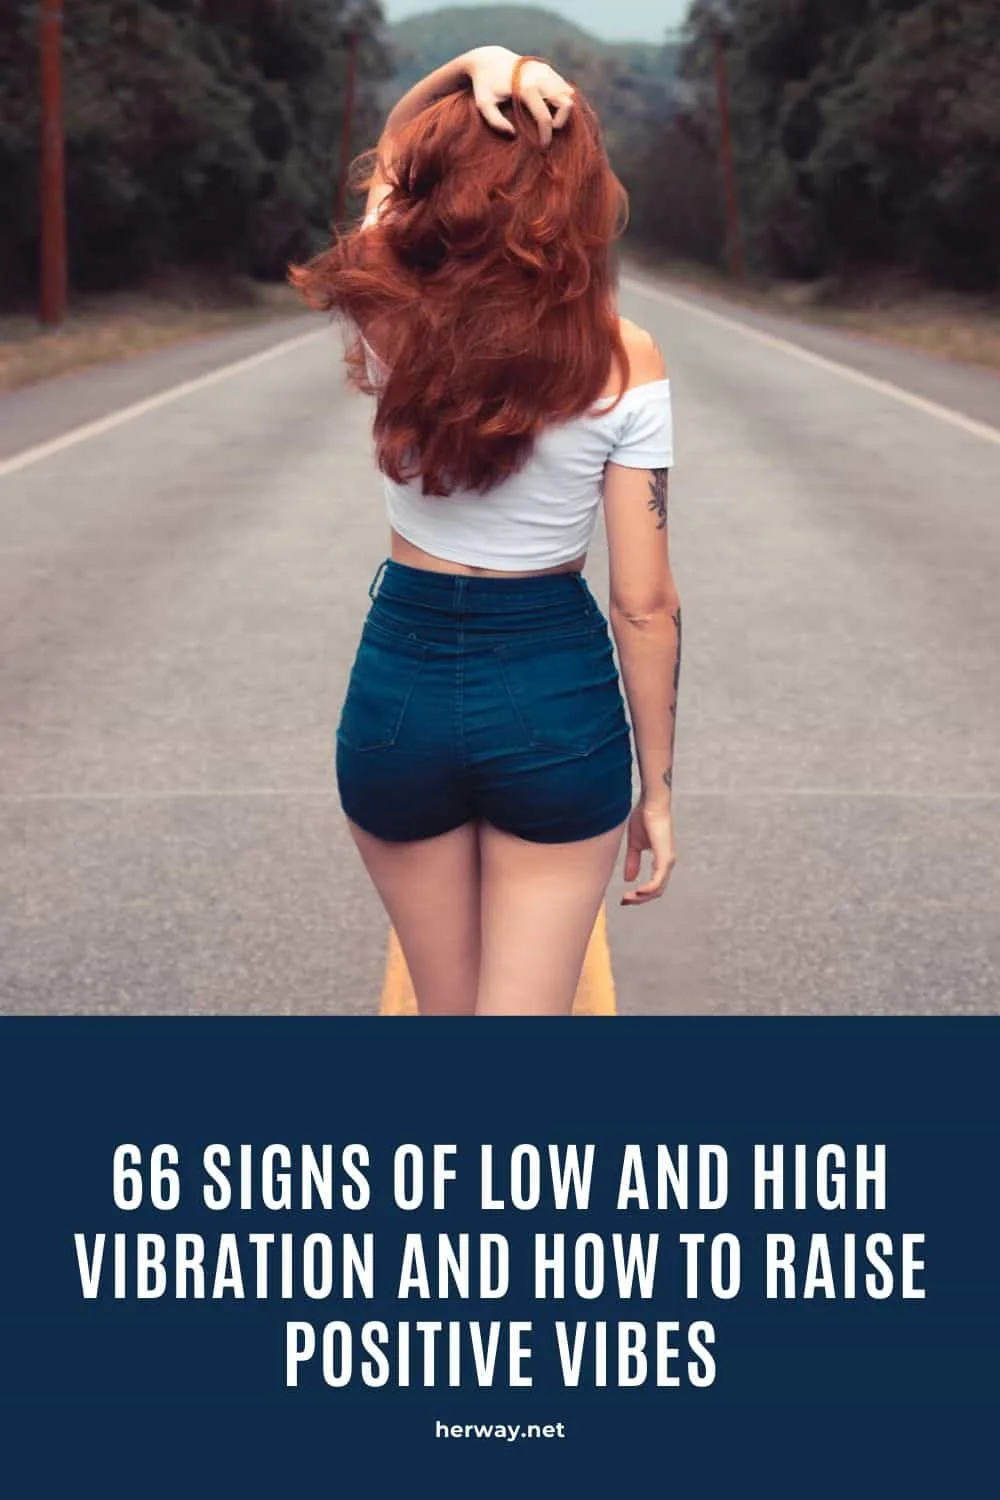 66 Signs Of Low And High Vibration And How To Raise Positive Vibes